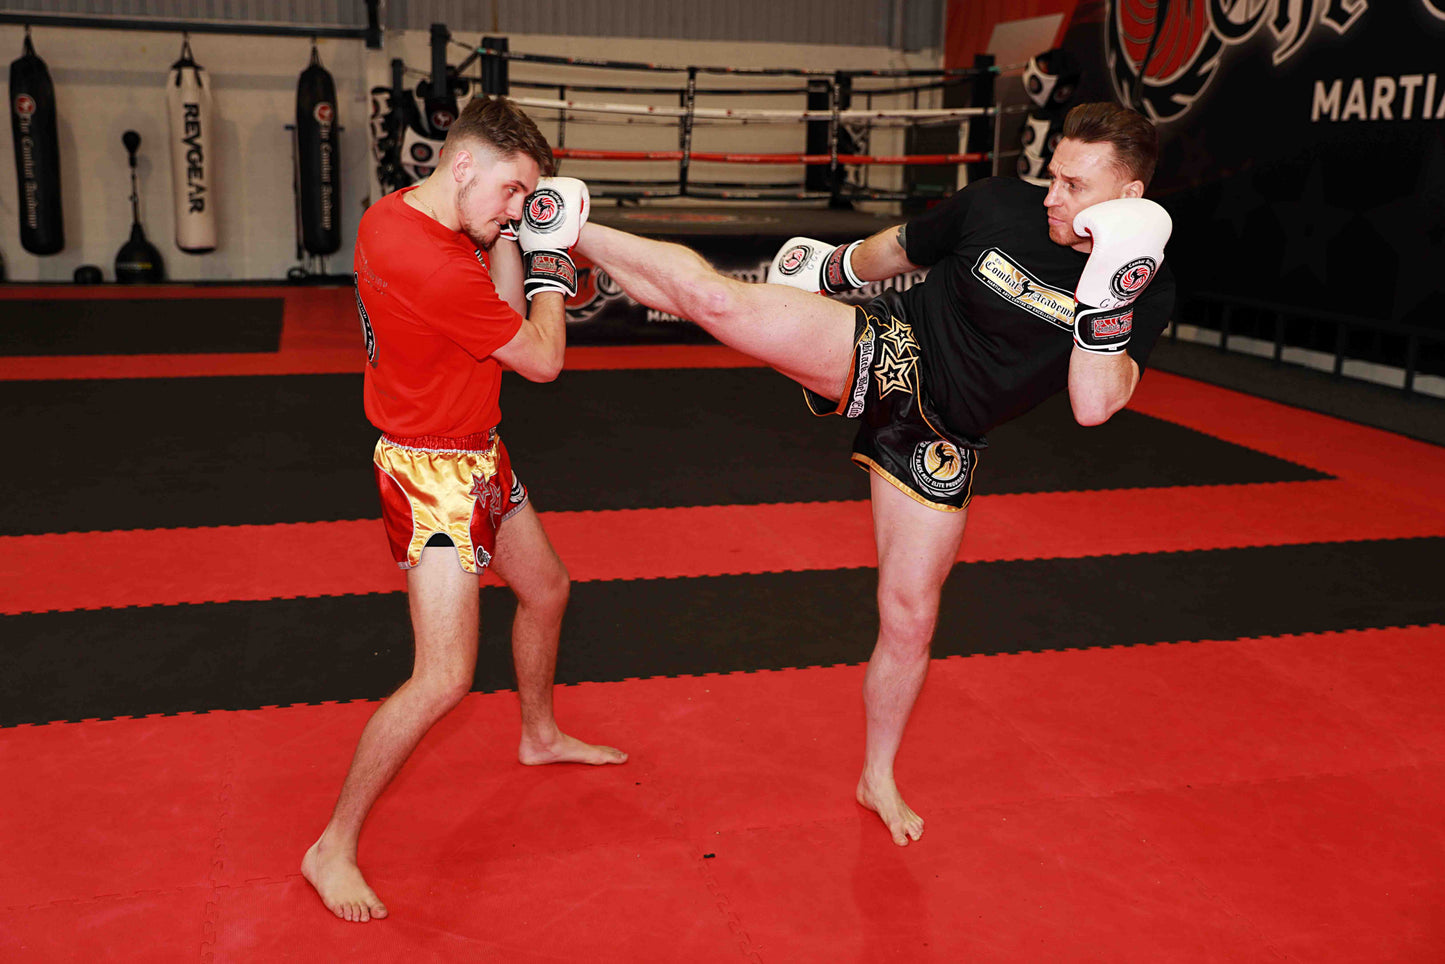 Kickboxing Sparring Drills - Developing Fighters with Mick Crossland